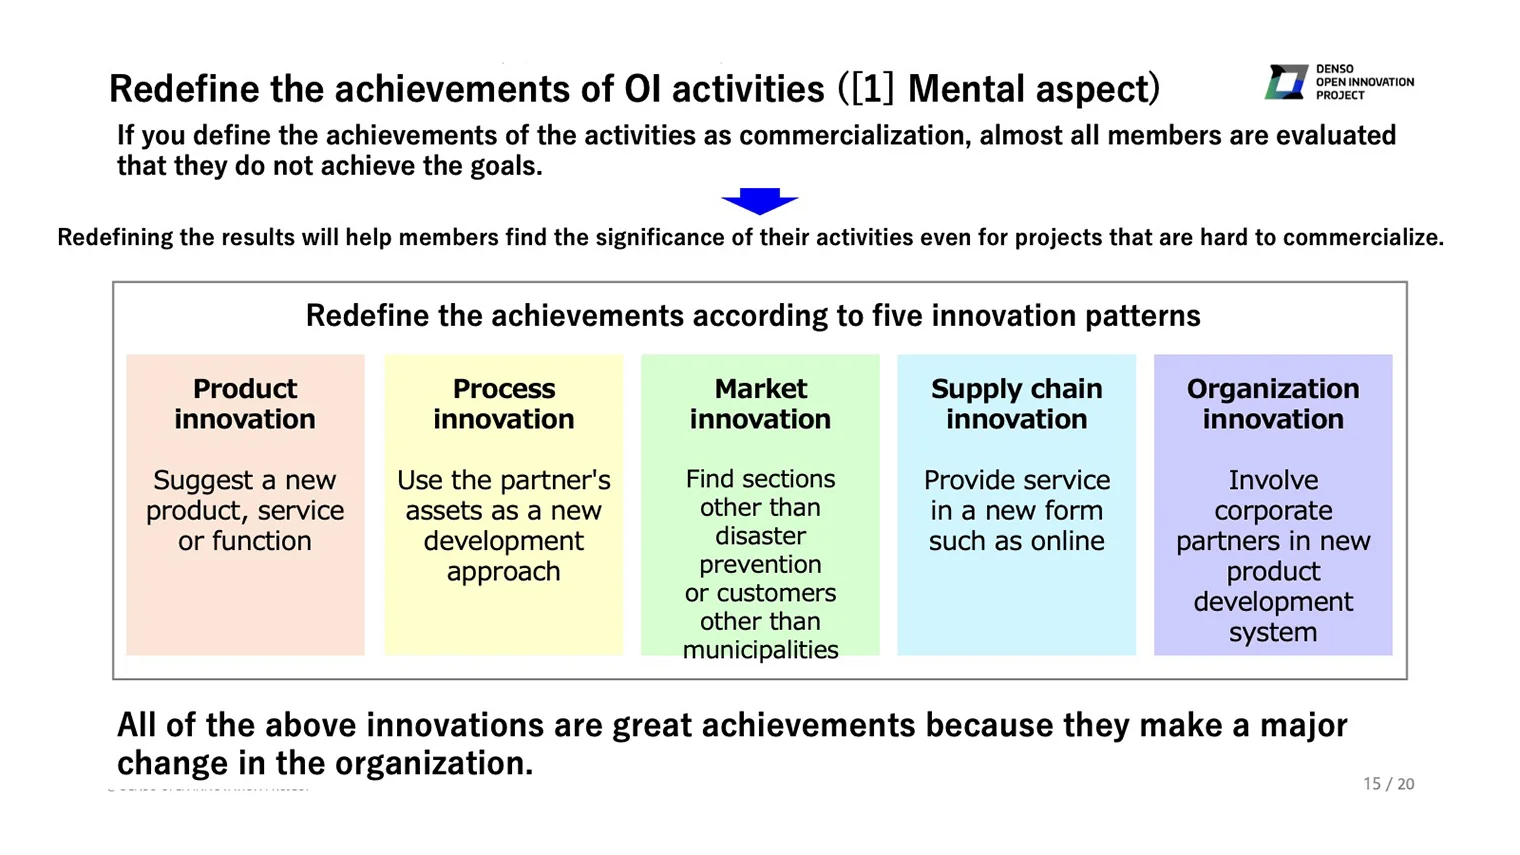 Redefine the achievements of OI activities ([1] Mental aspect) If you define the achievements of the activities as commercialization, almost all members are evaluated that they do not achieve the goals. → Redefining the results will help members find the significance of their activities even for projects that are hard to commercialize. Redefine the achievements according to five innovation patterns.